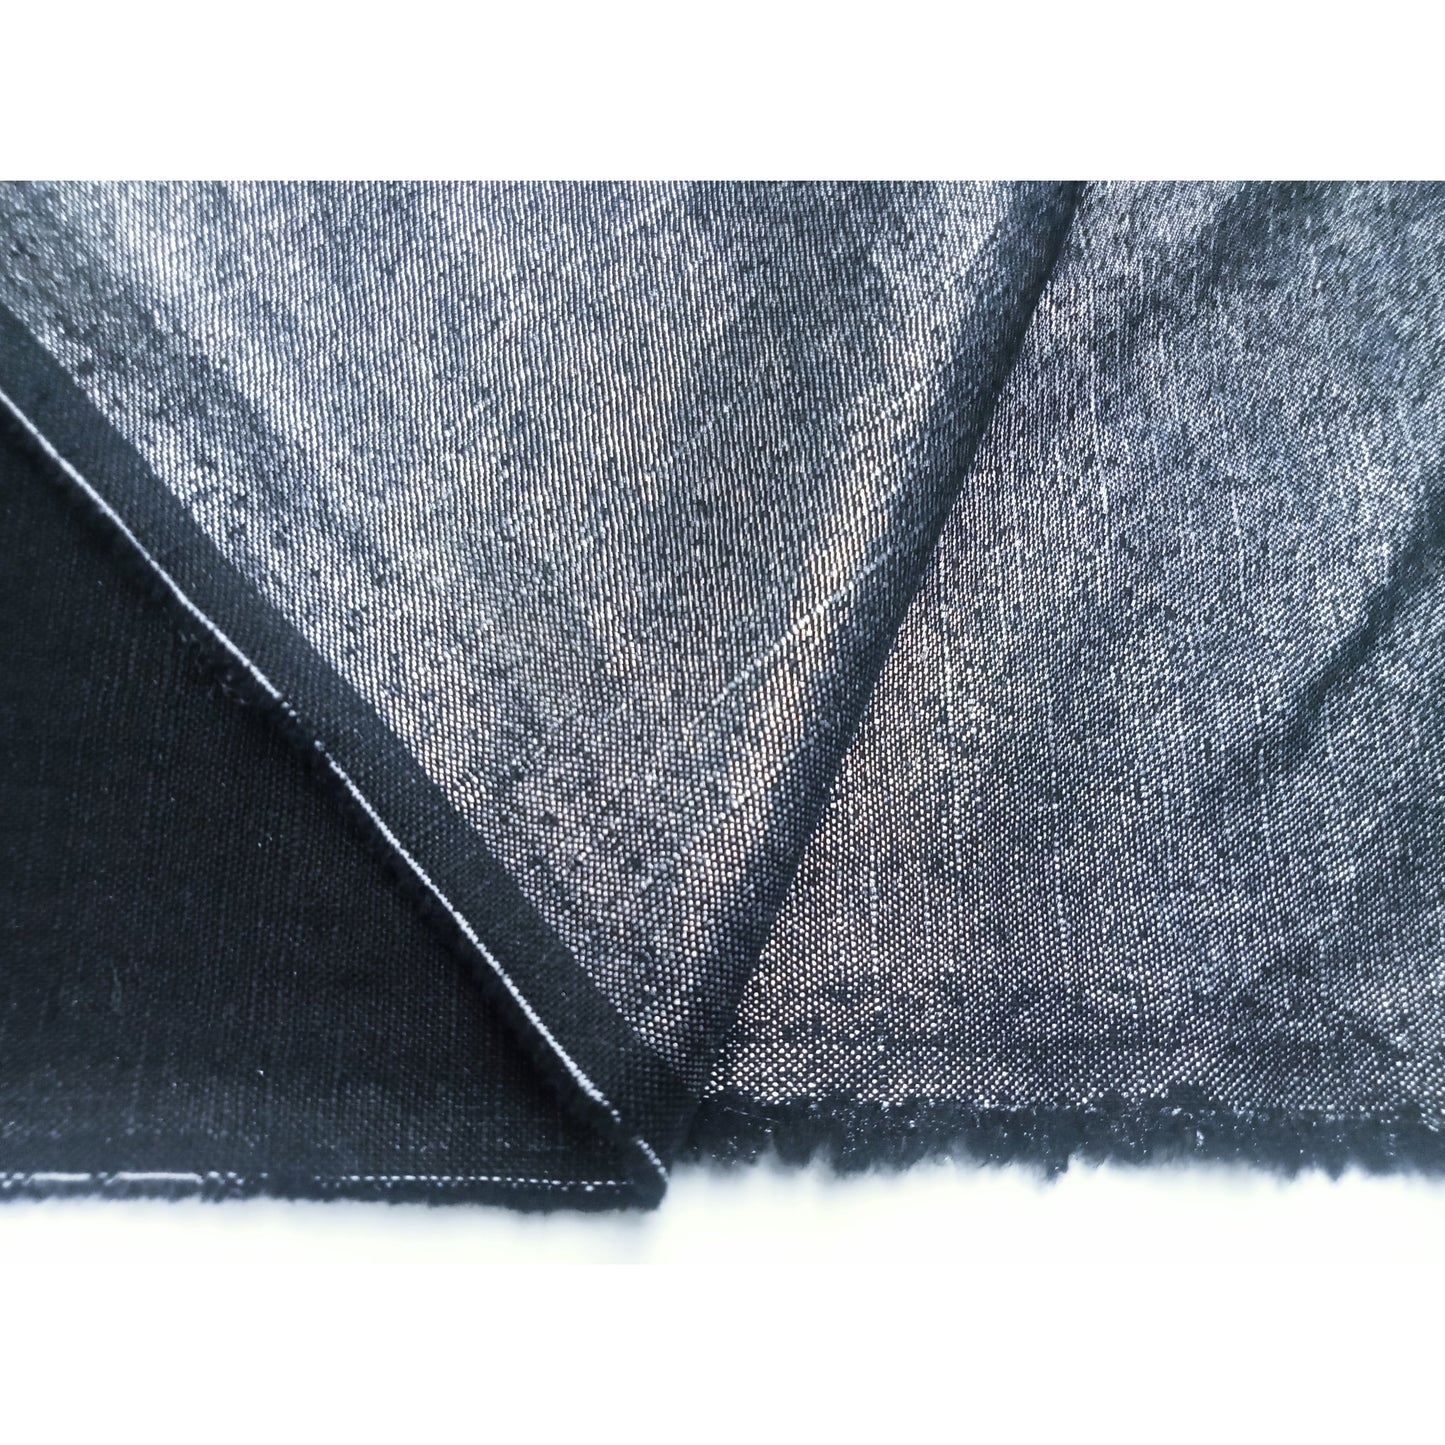 Indi black - woven shimmer cotton /linen fabric -sold by 1/2mtr